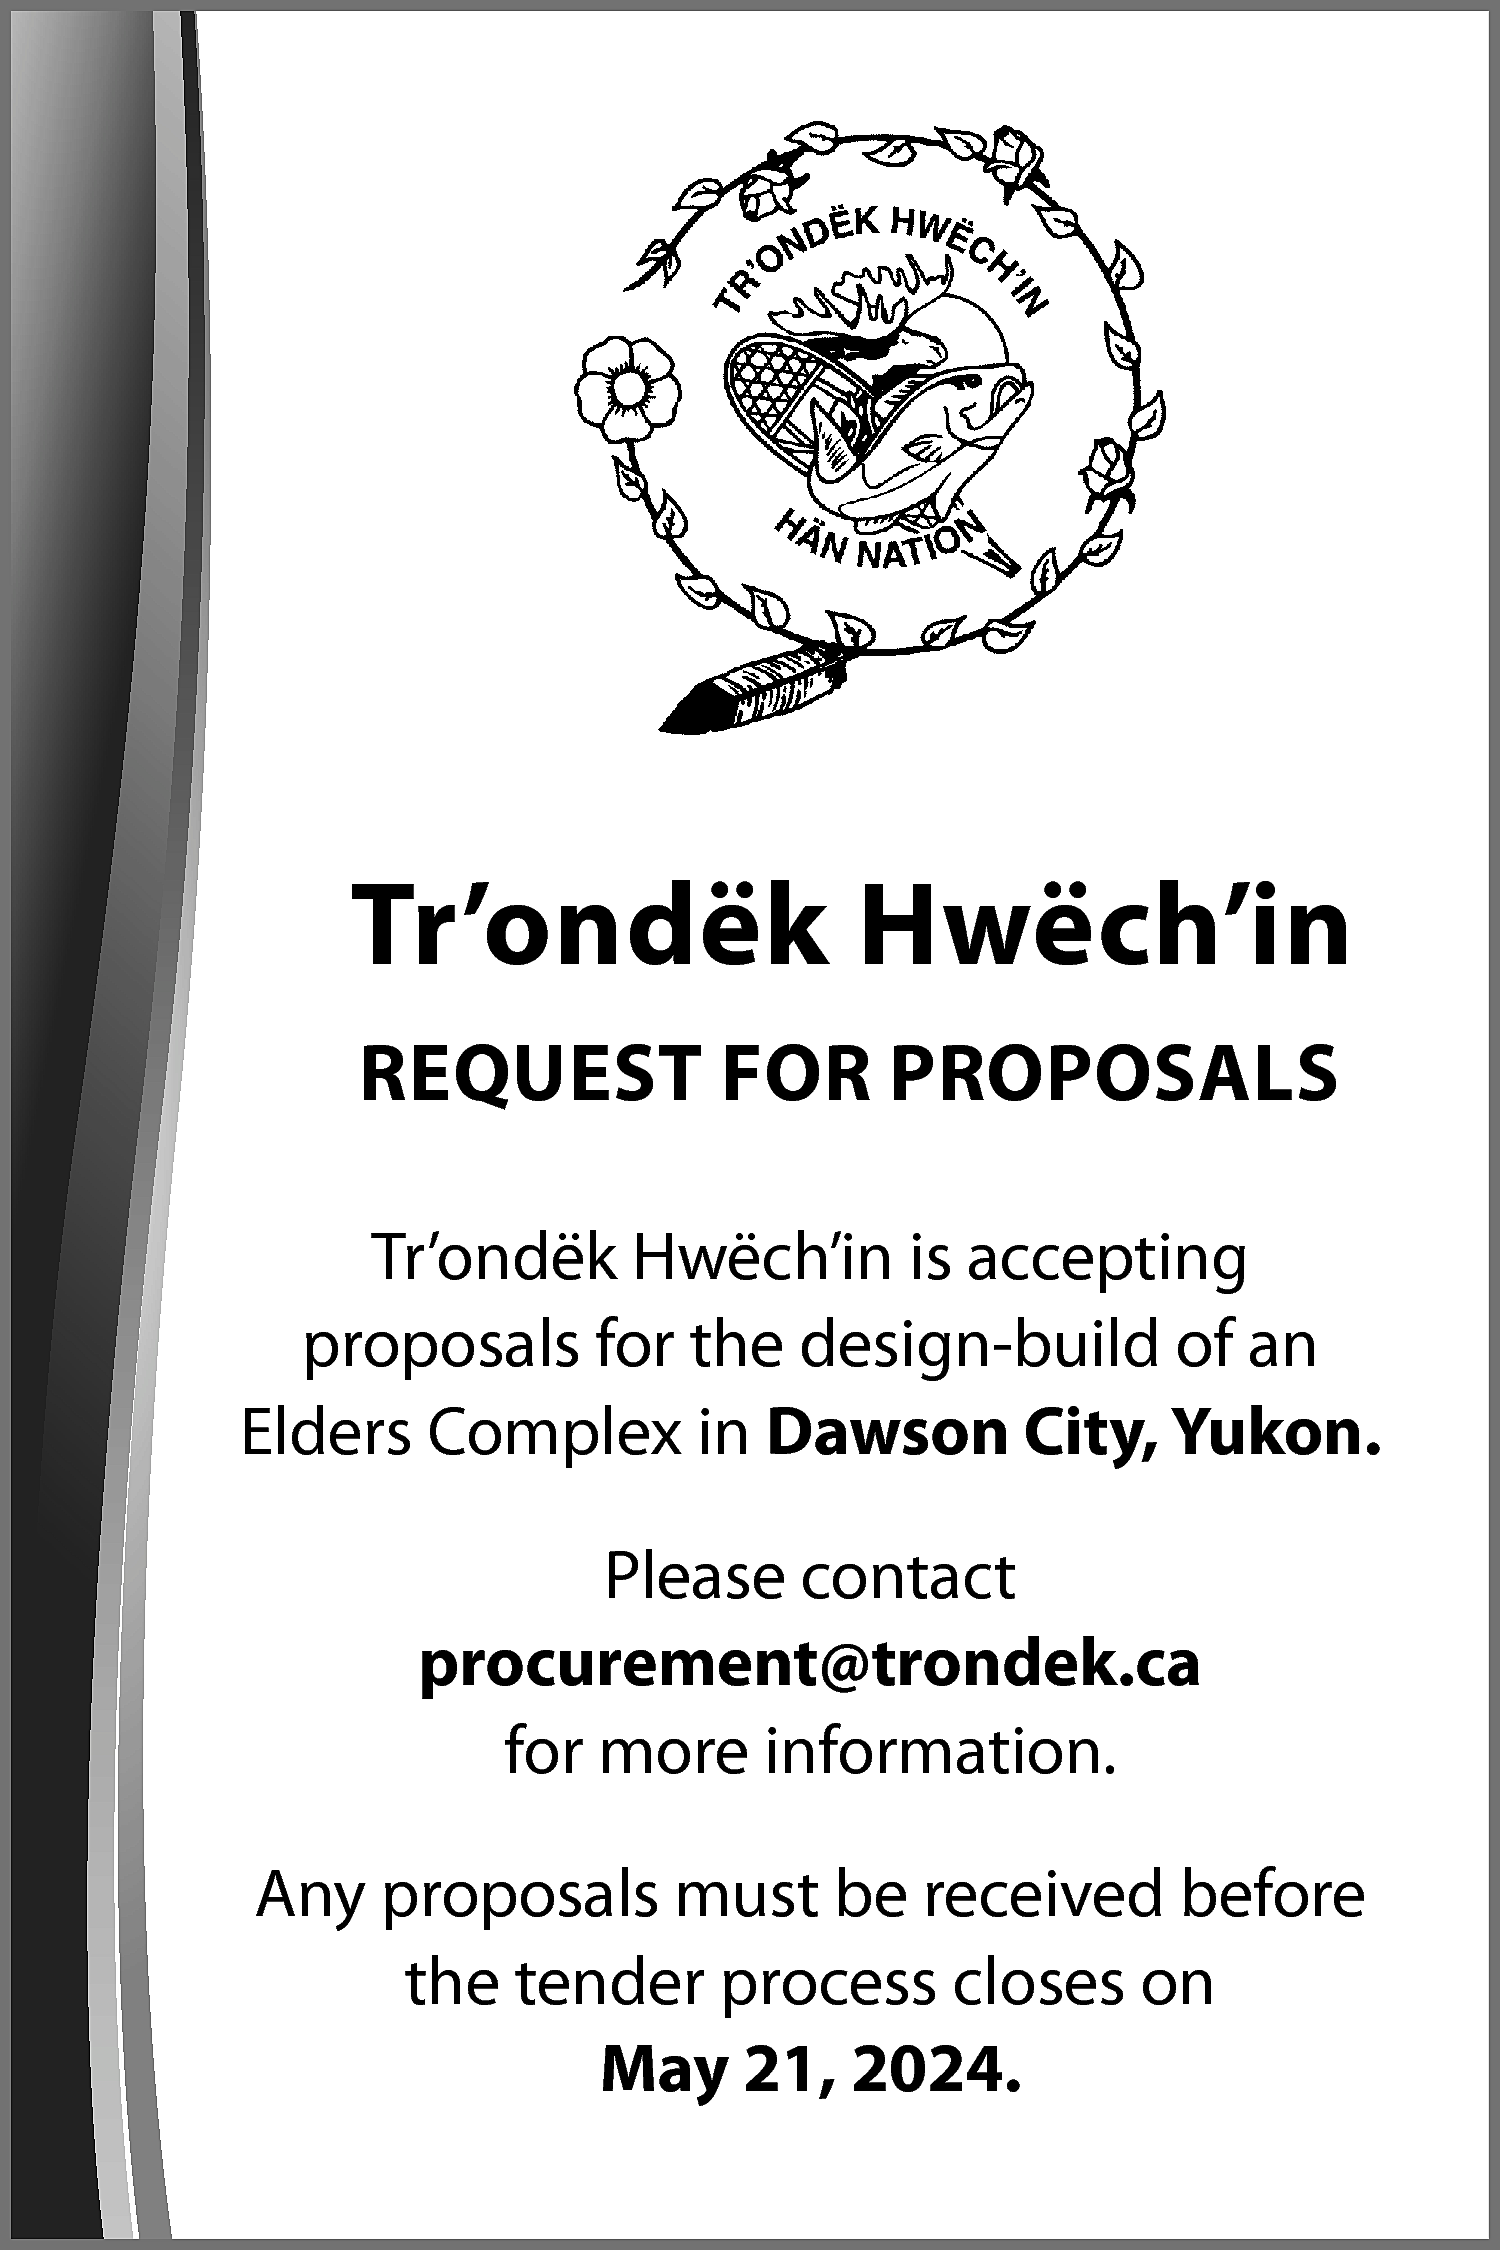 Tr’ondëk Hwëch’in <br>REQUEST FOR PROPOSALS  Tr’ondëk Hwëch’in  REQUEST FOR PROPOSALS  Tr’ondëk Hwëch’in is accepting  proposals for the design-build of an  Elders Complex in Dawson City, Yukon.  Please contact  procurement@trondek.ca  for more information.  Any proposals must be received before  the tender process closes on  May 21, 2024.    